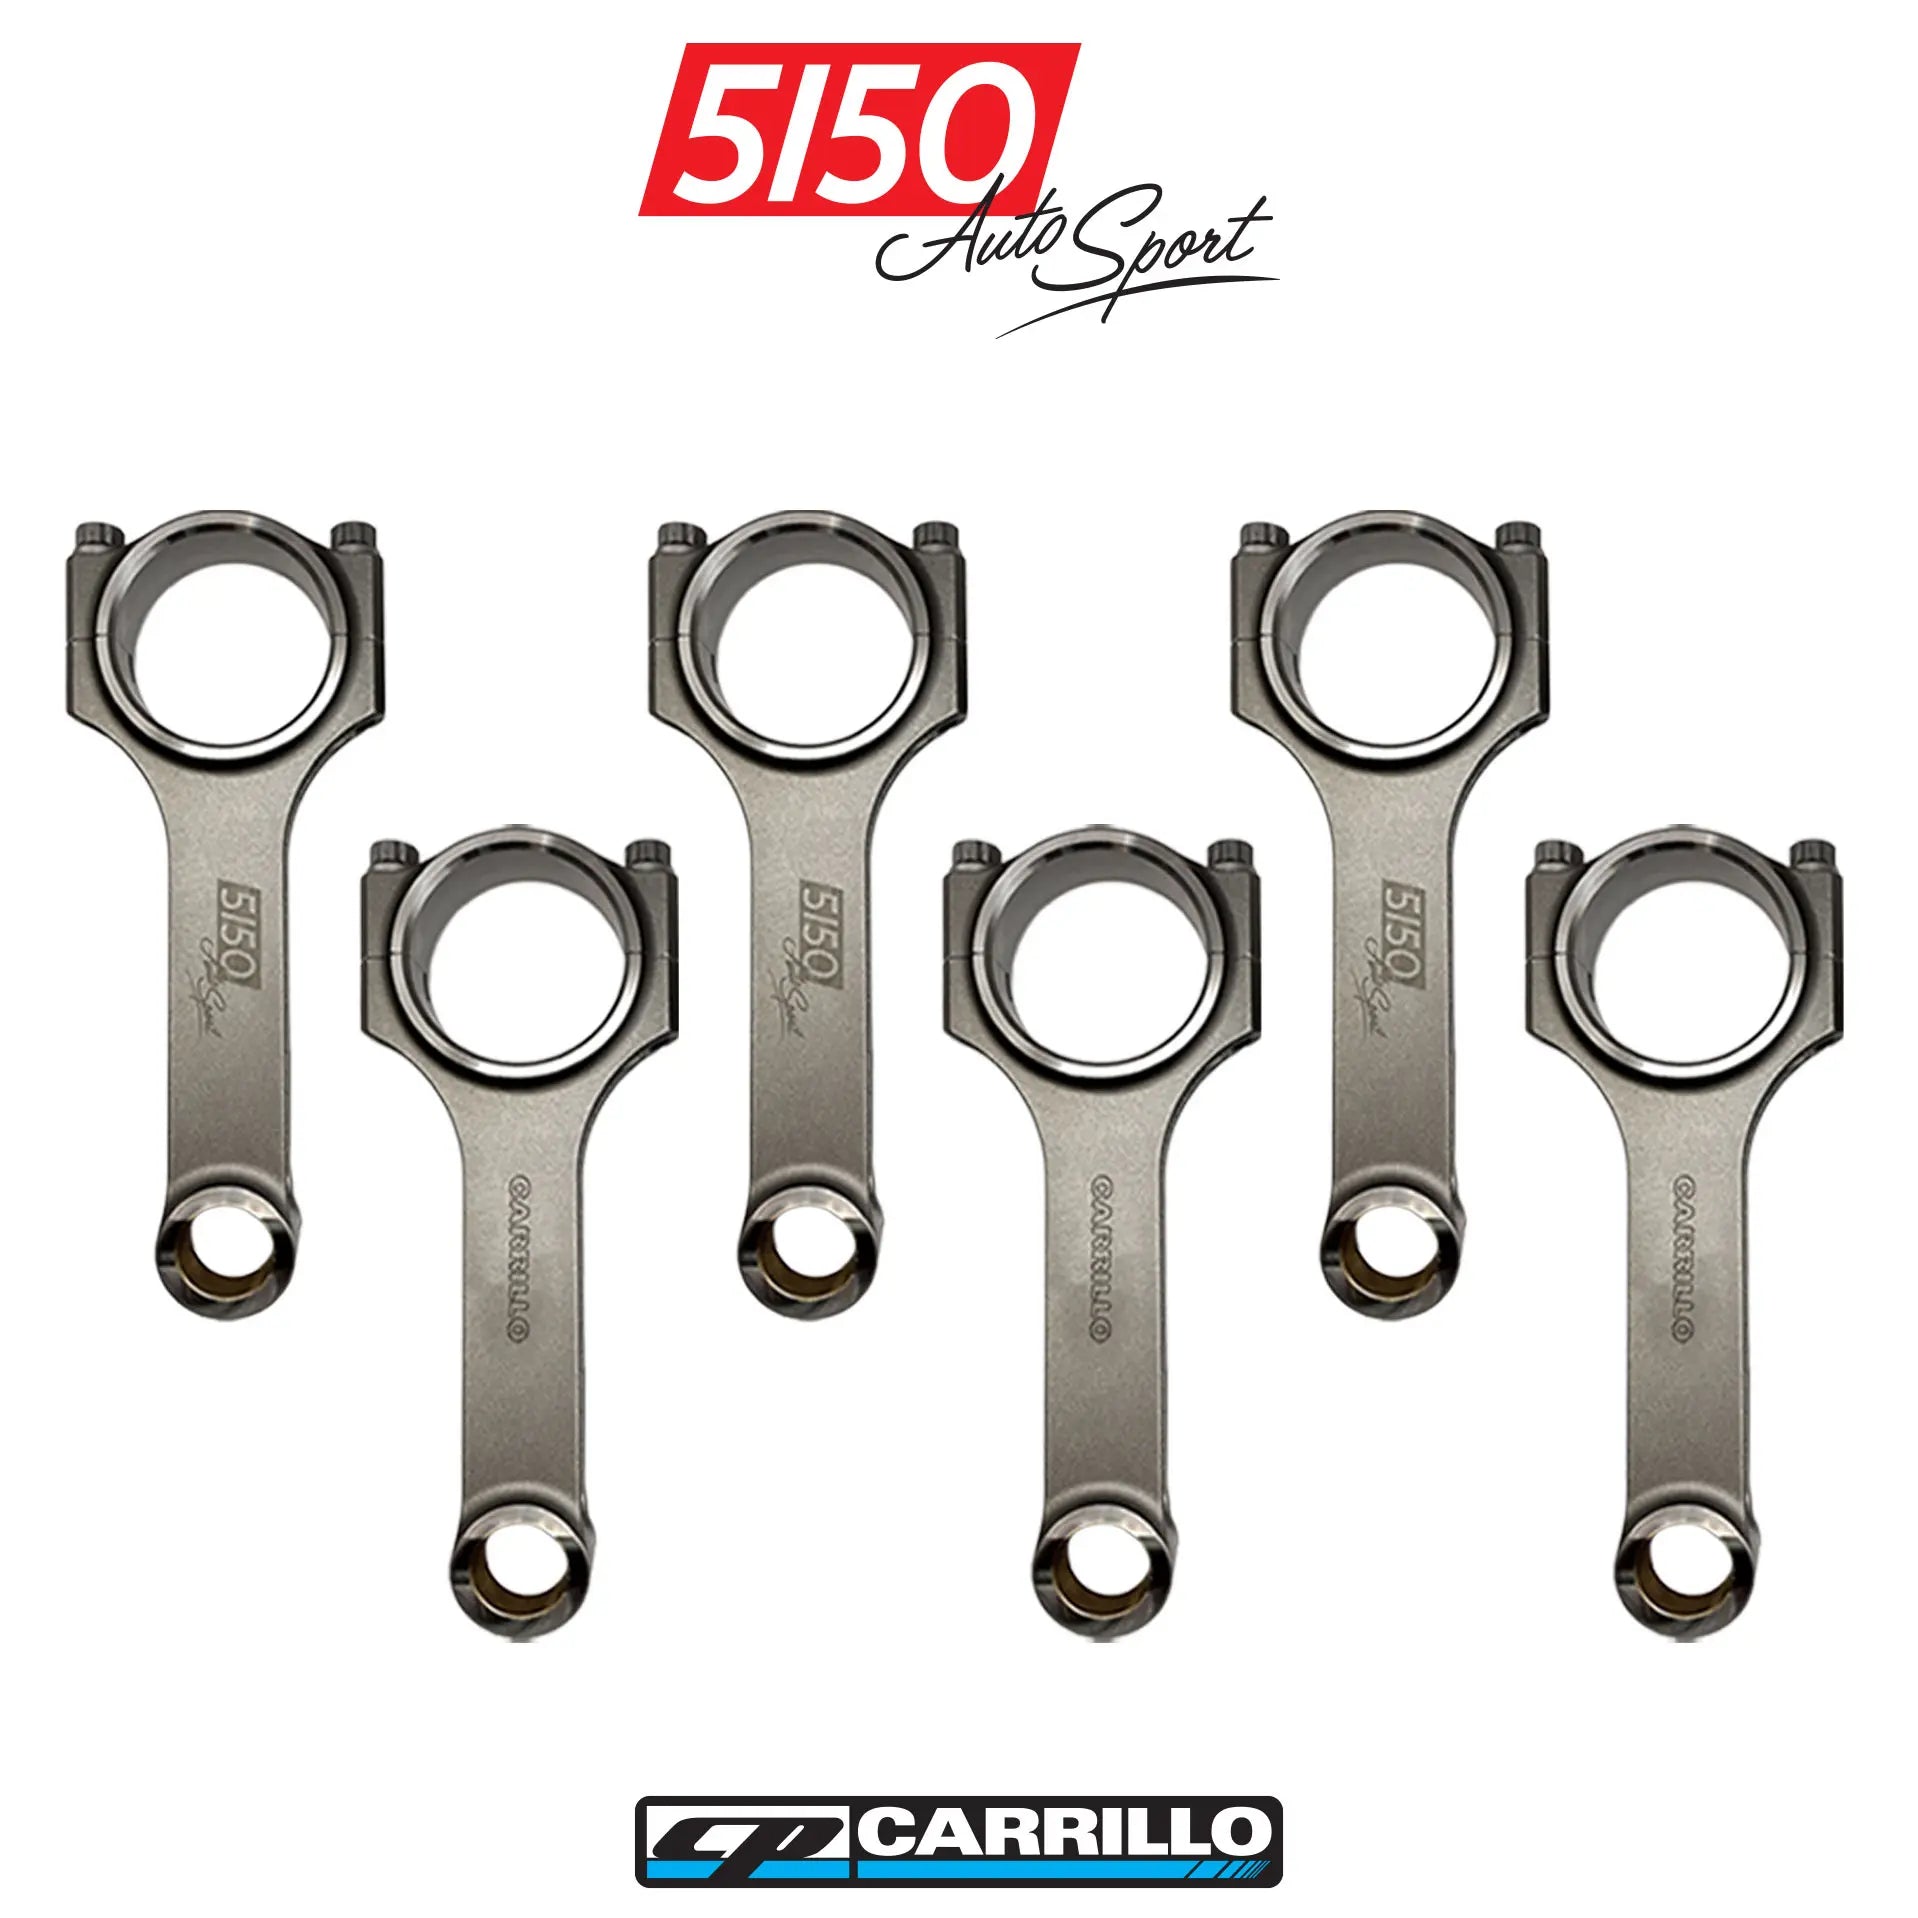 CP-Carrillo Forged Connecting Rod Set for BMW M54 Pro-Xtreme